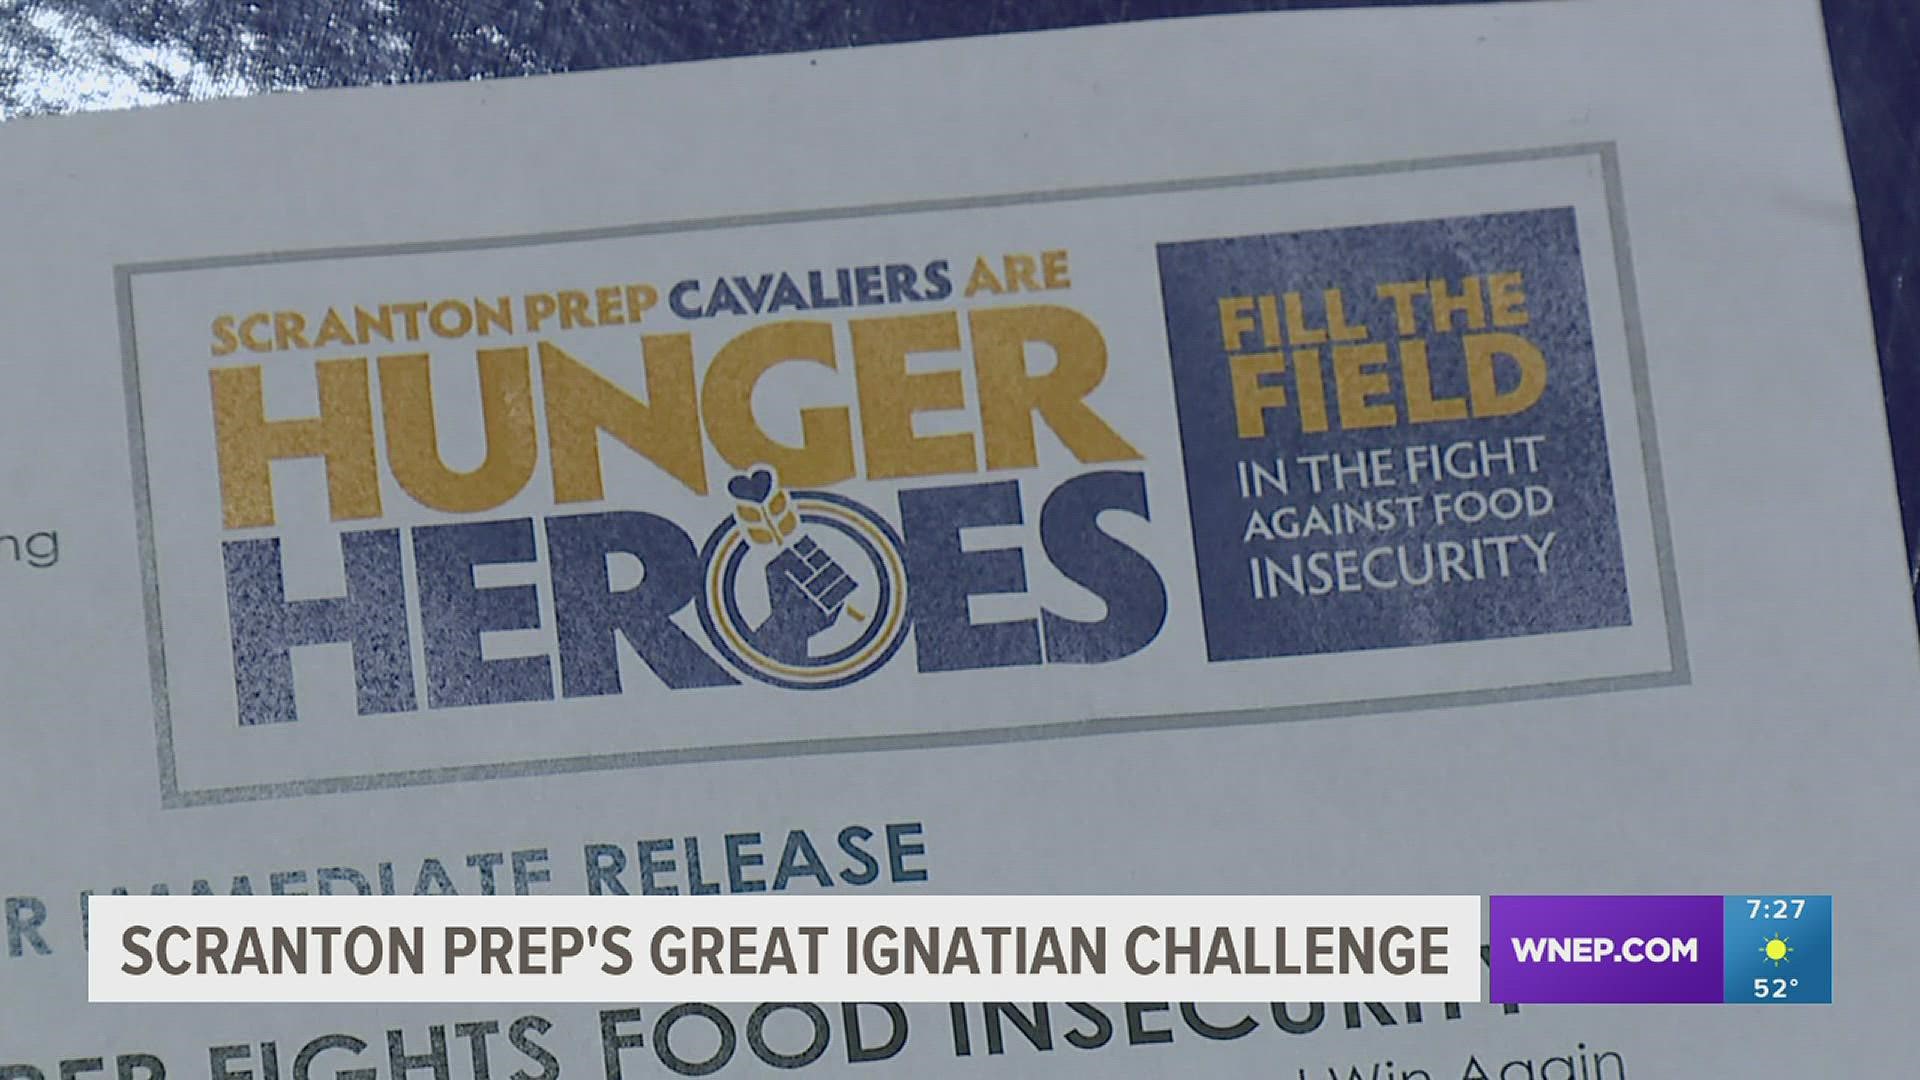 For the second year, Scranton Prep's "Great Ignatian Challenge" is back. It's a month-long food drive that benefits 12 food banks and charities in NEPA.